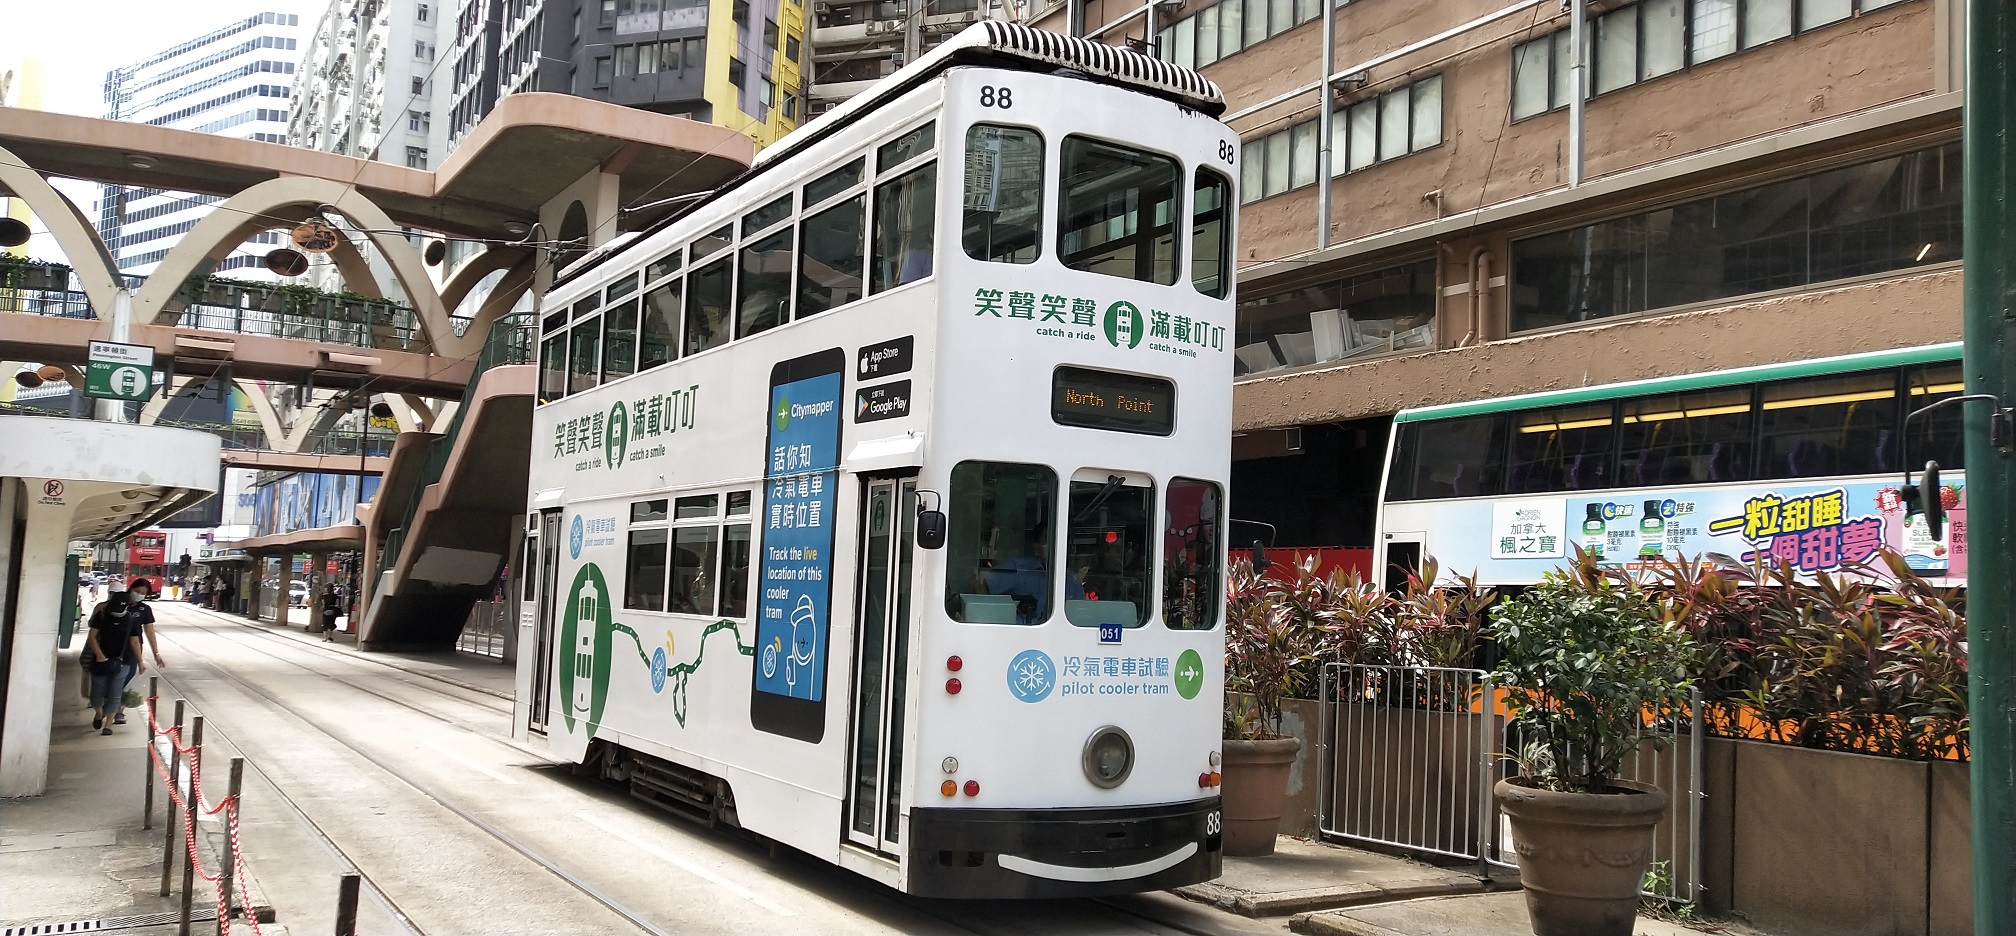 A Guinness World Record, largest double-decker tram fleet in service, is waiting for travelers in Hong Kong!